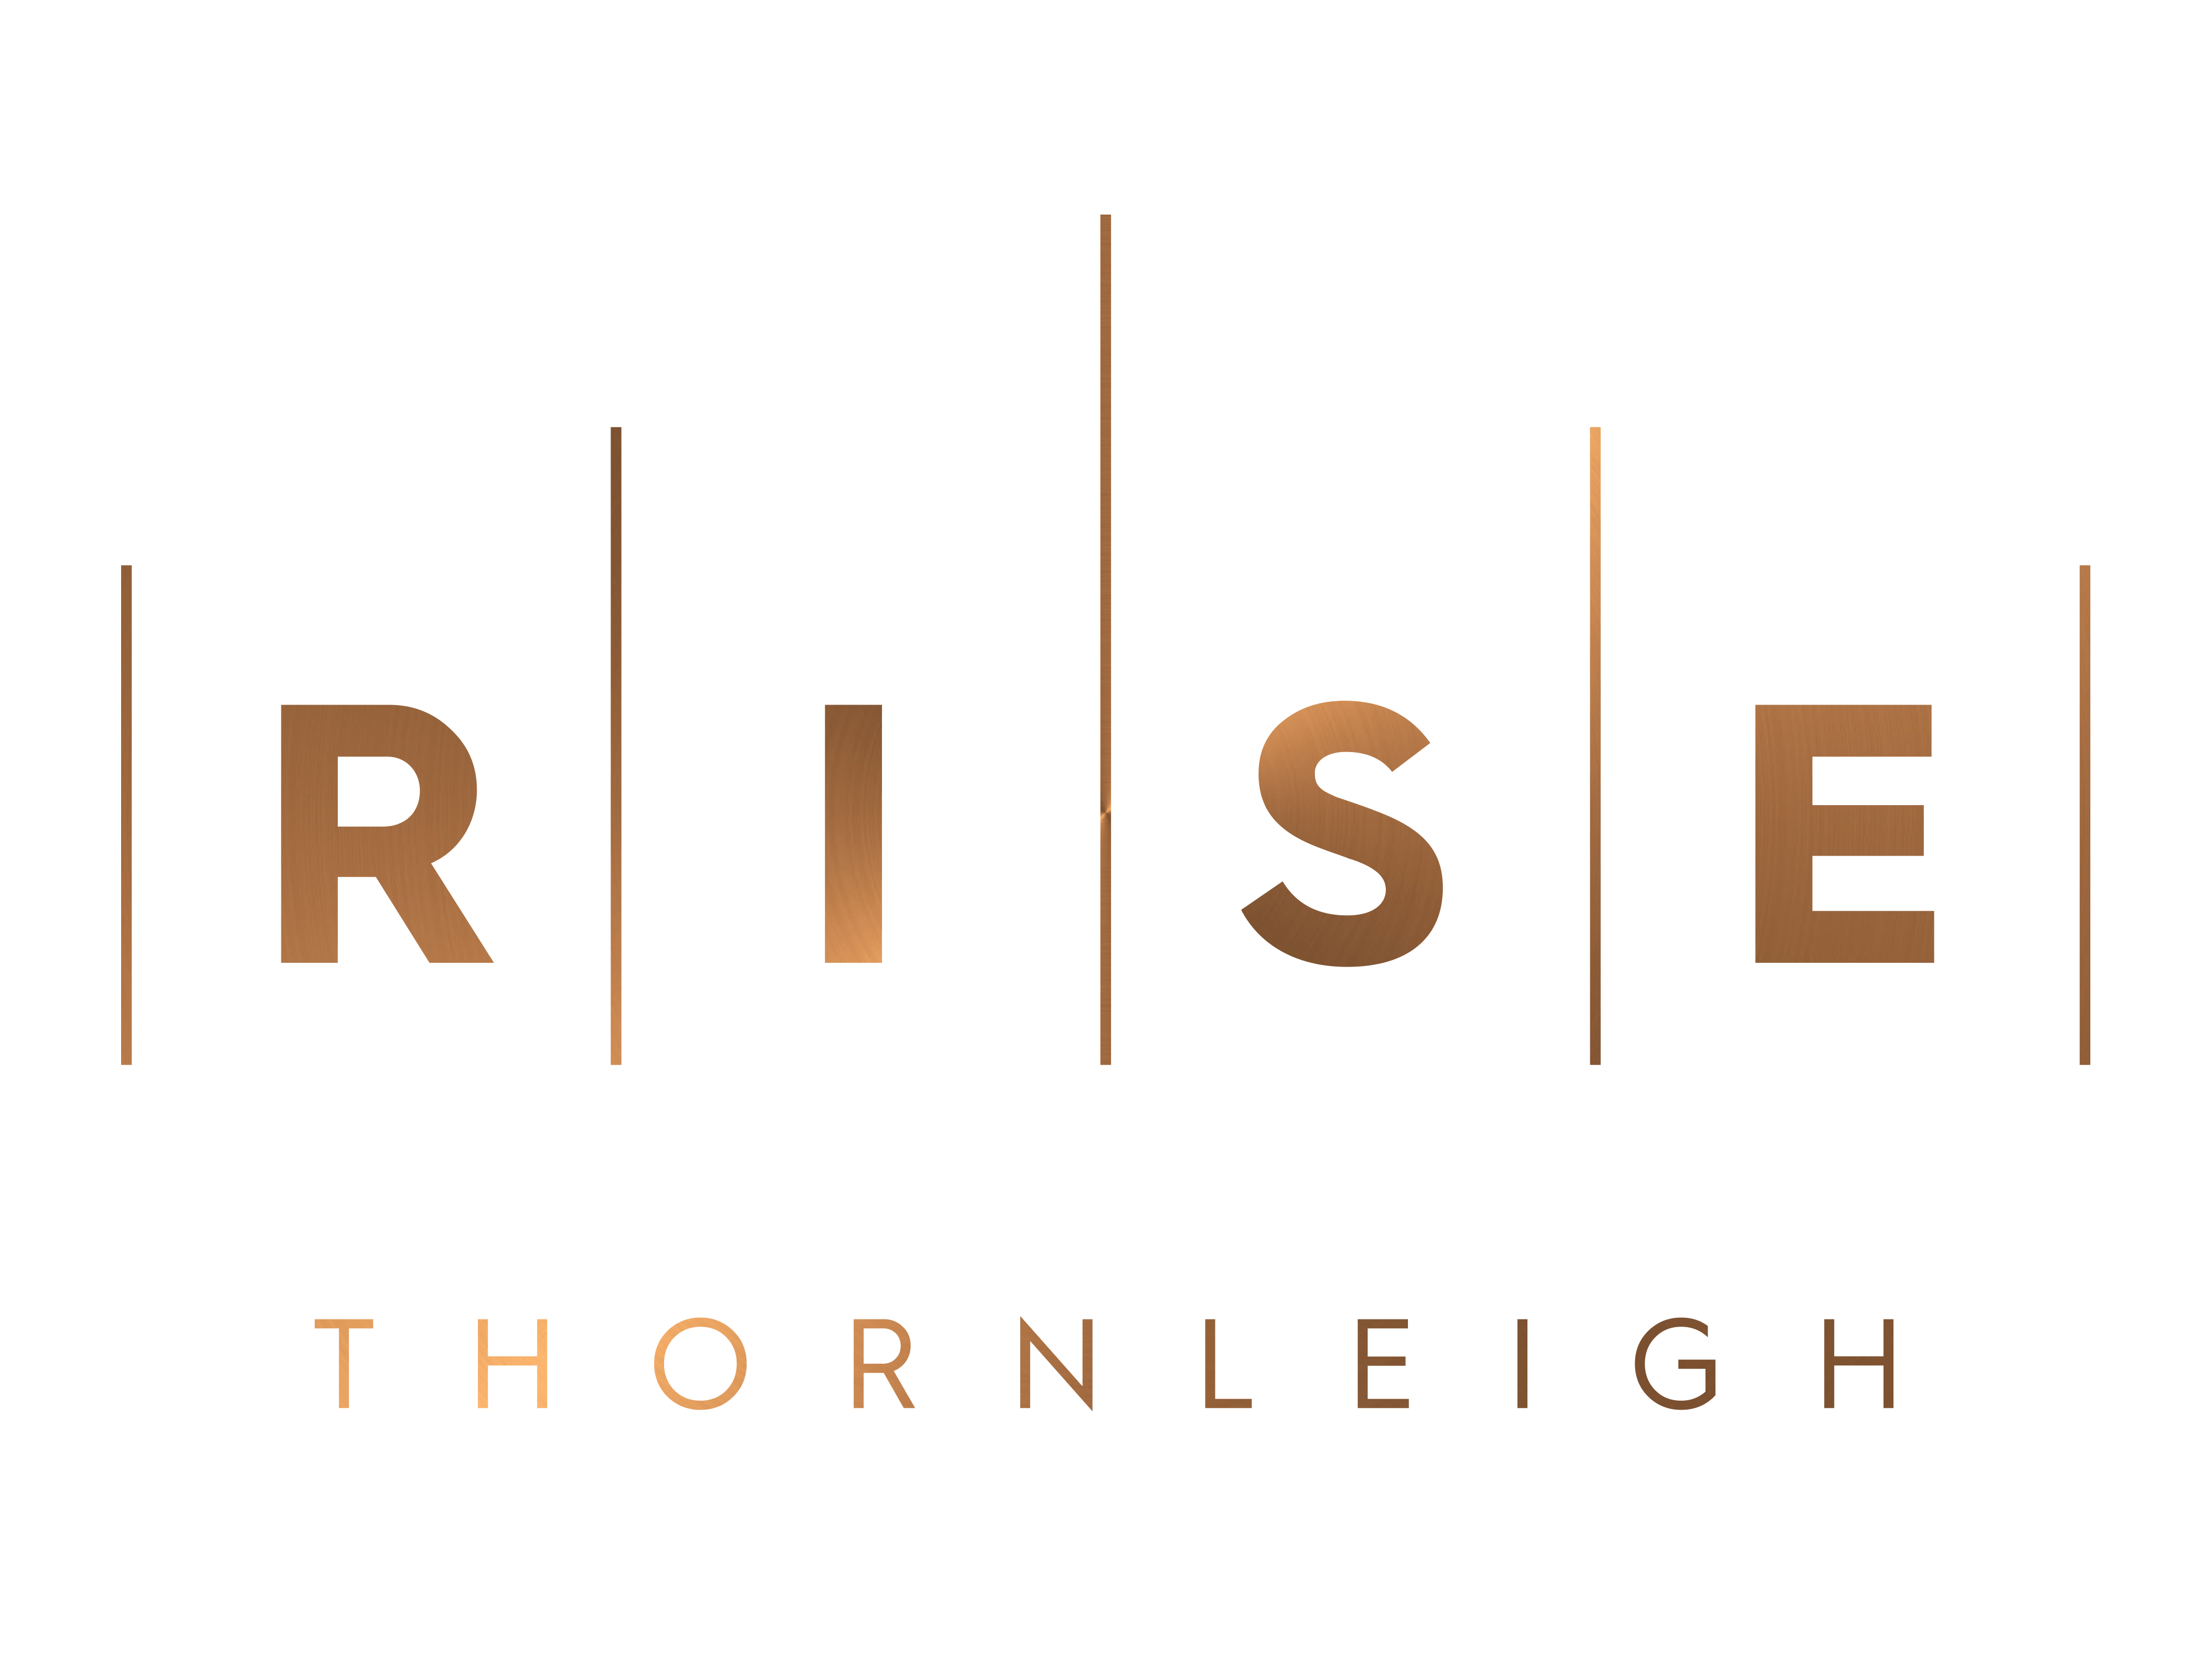 Rise Logo - RISE Thornleigh Apartments in Sydney, New South Wales. Ray